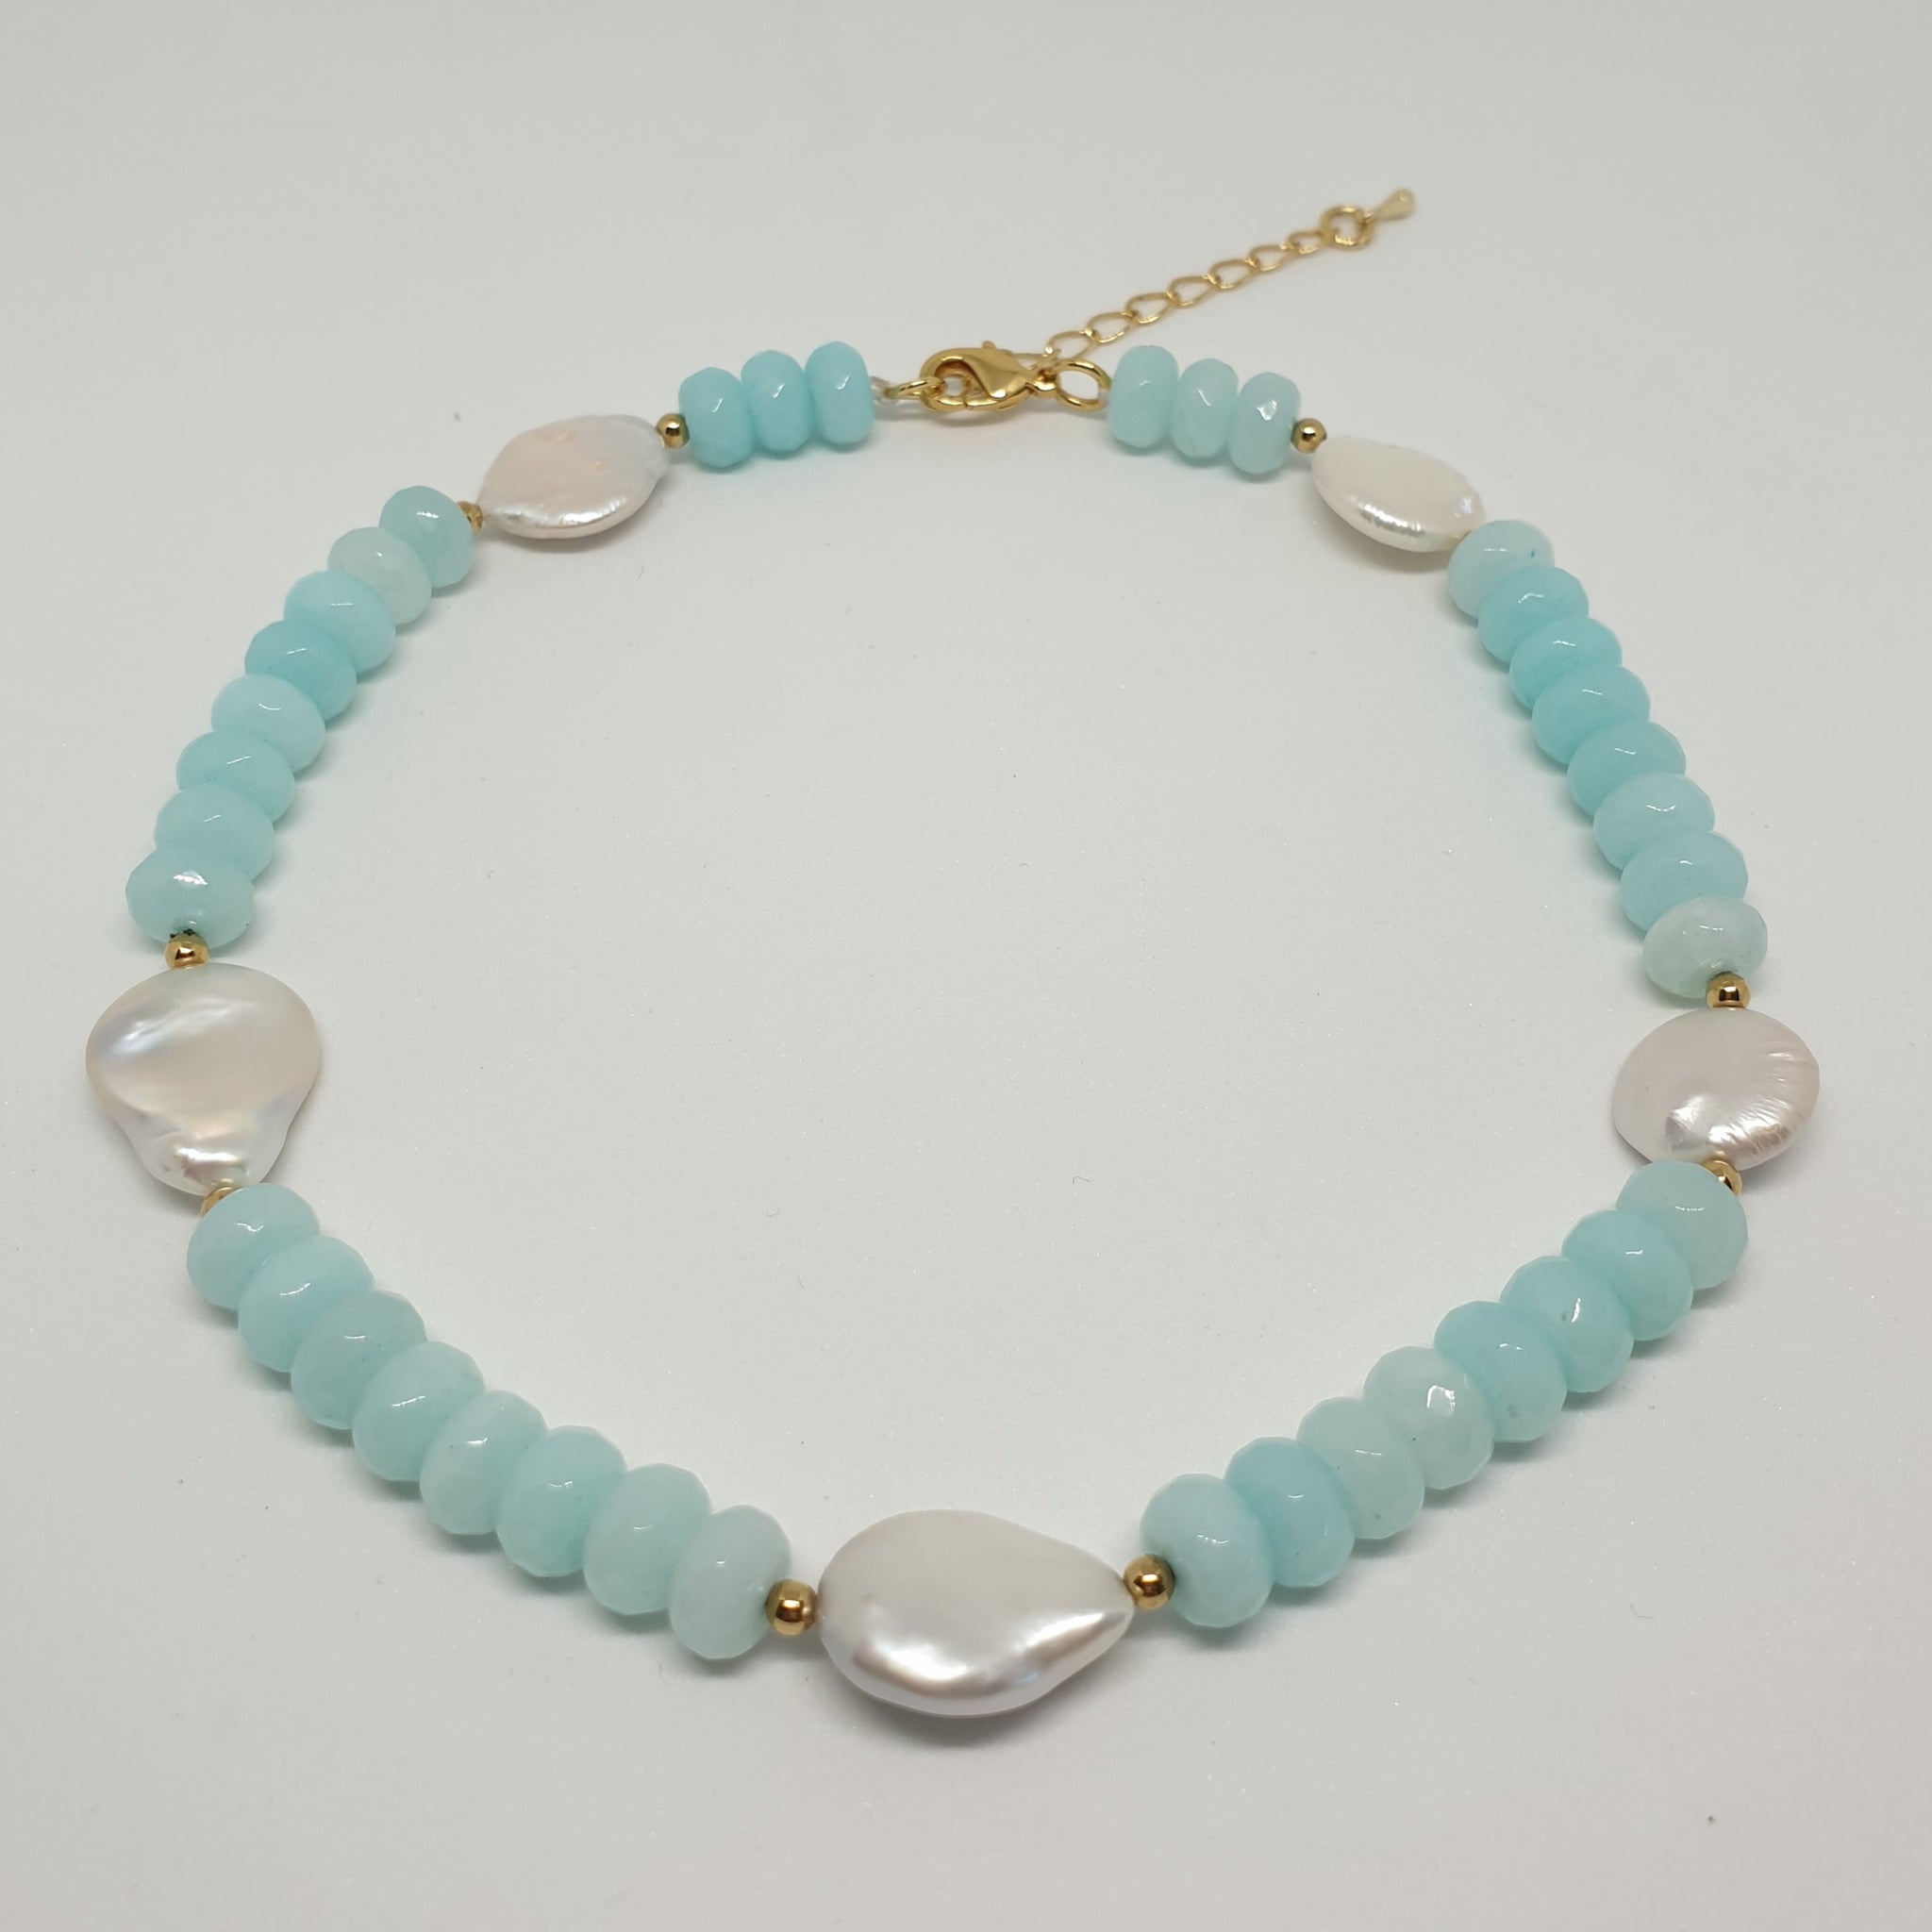 Aquamarine Beads and Keshi Coin Pearl Necklace